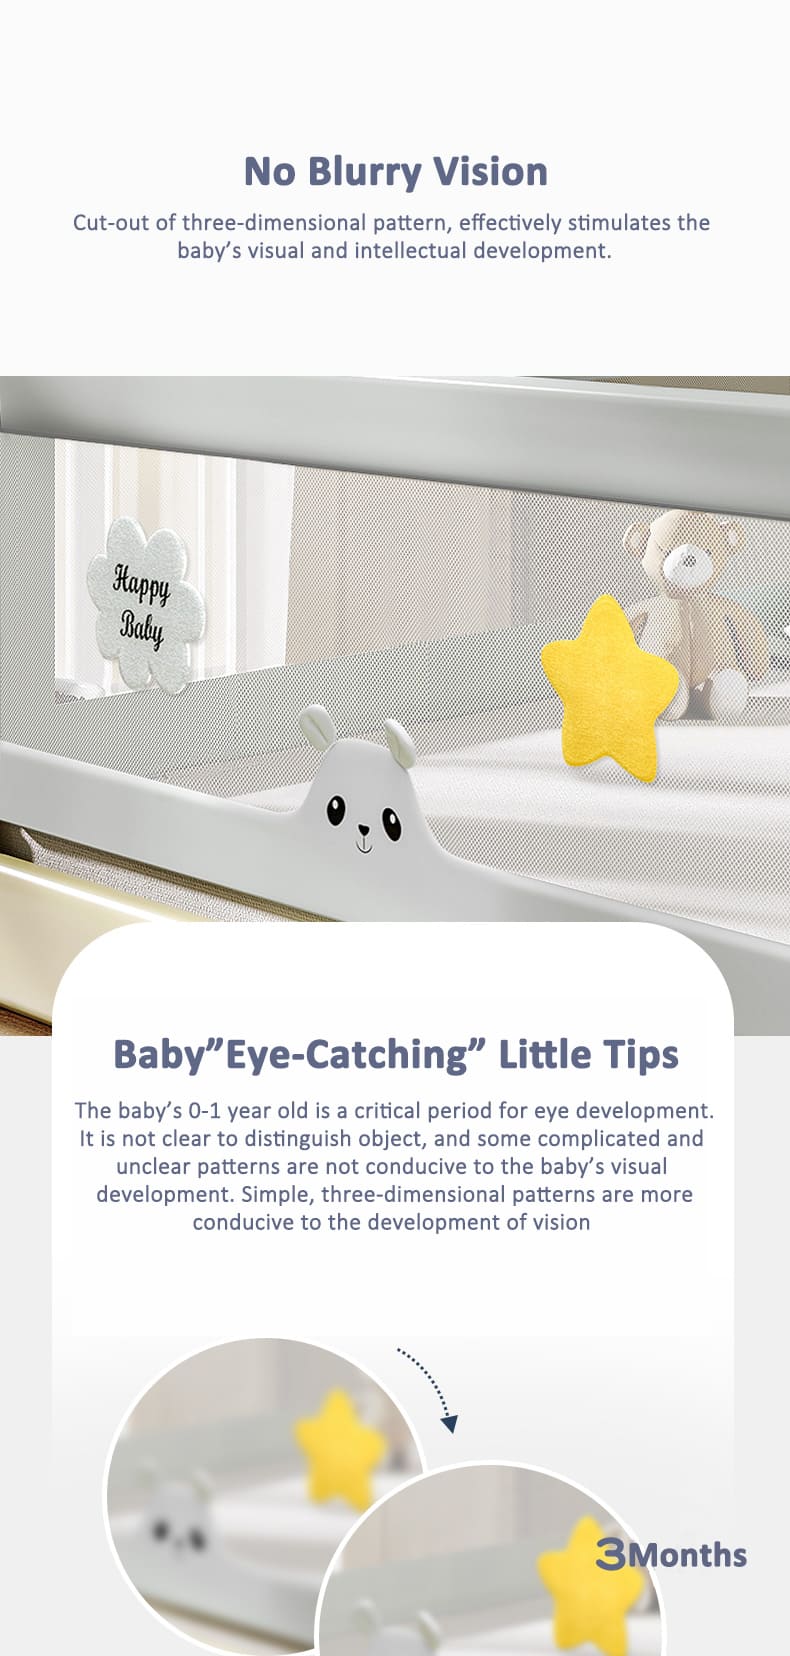 Baby Safety Bed Rails